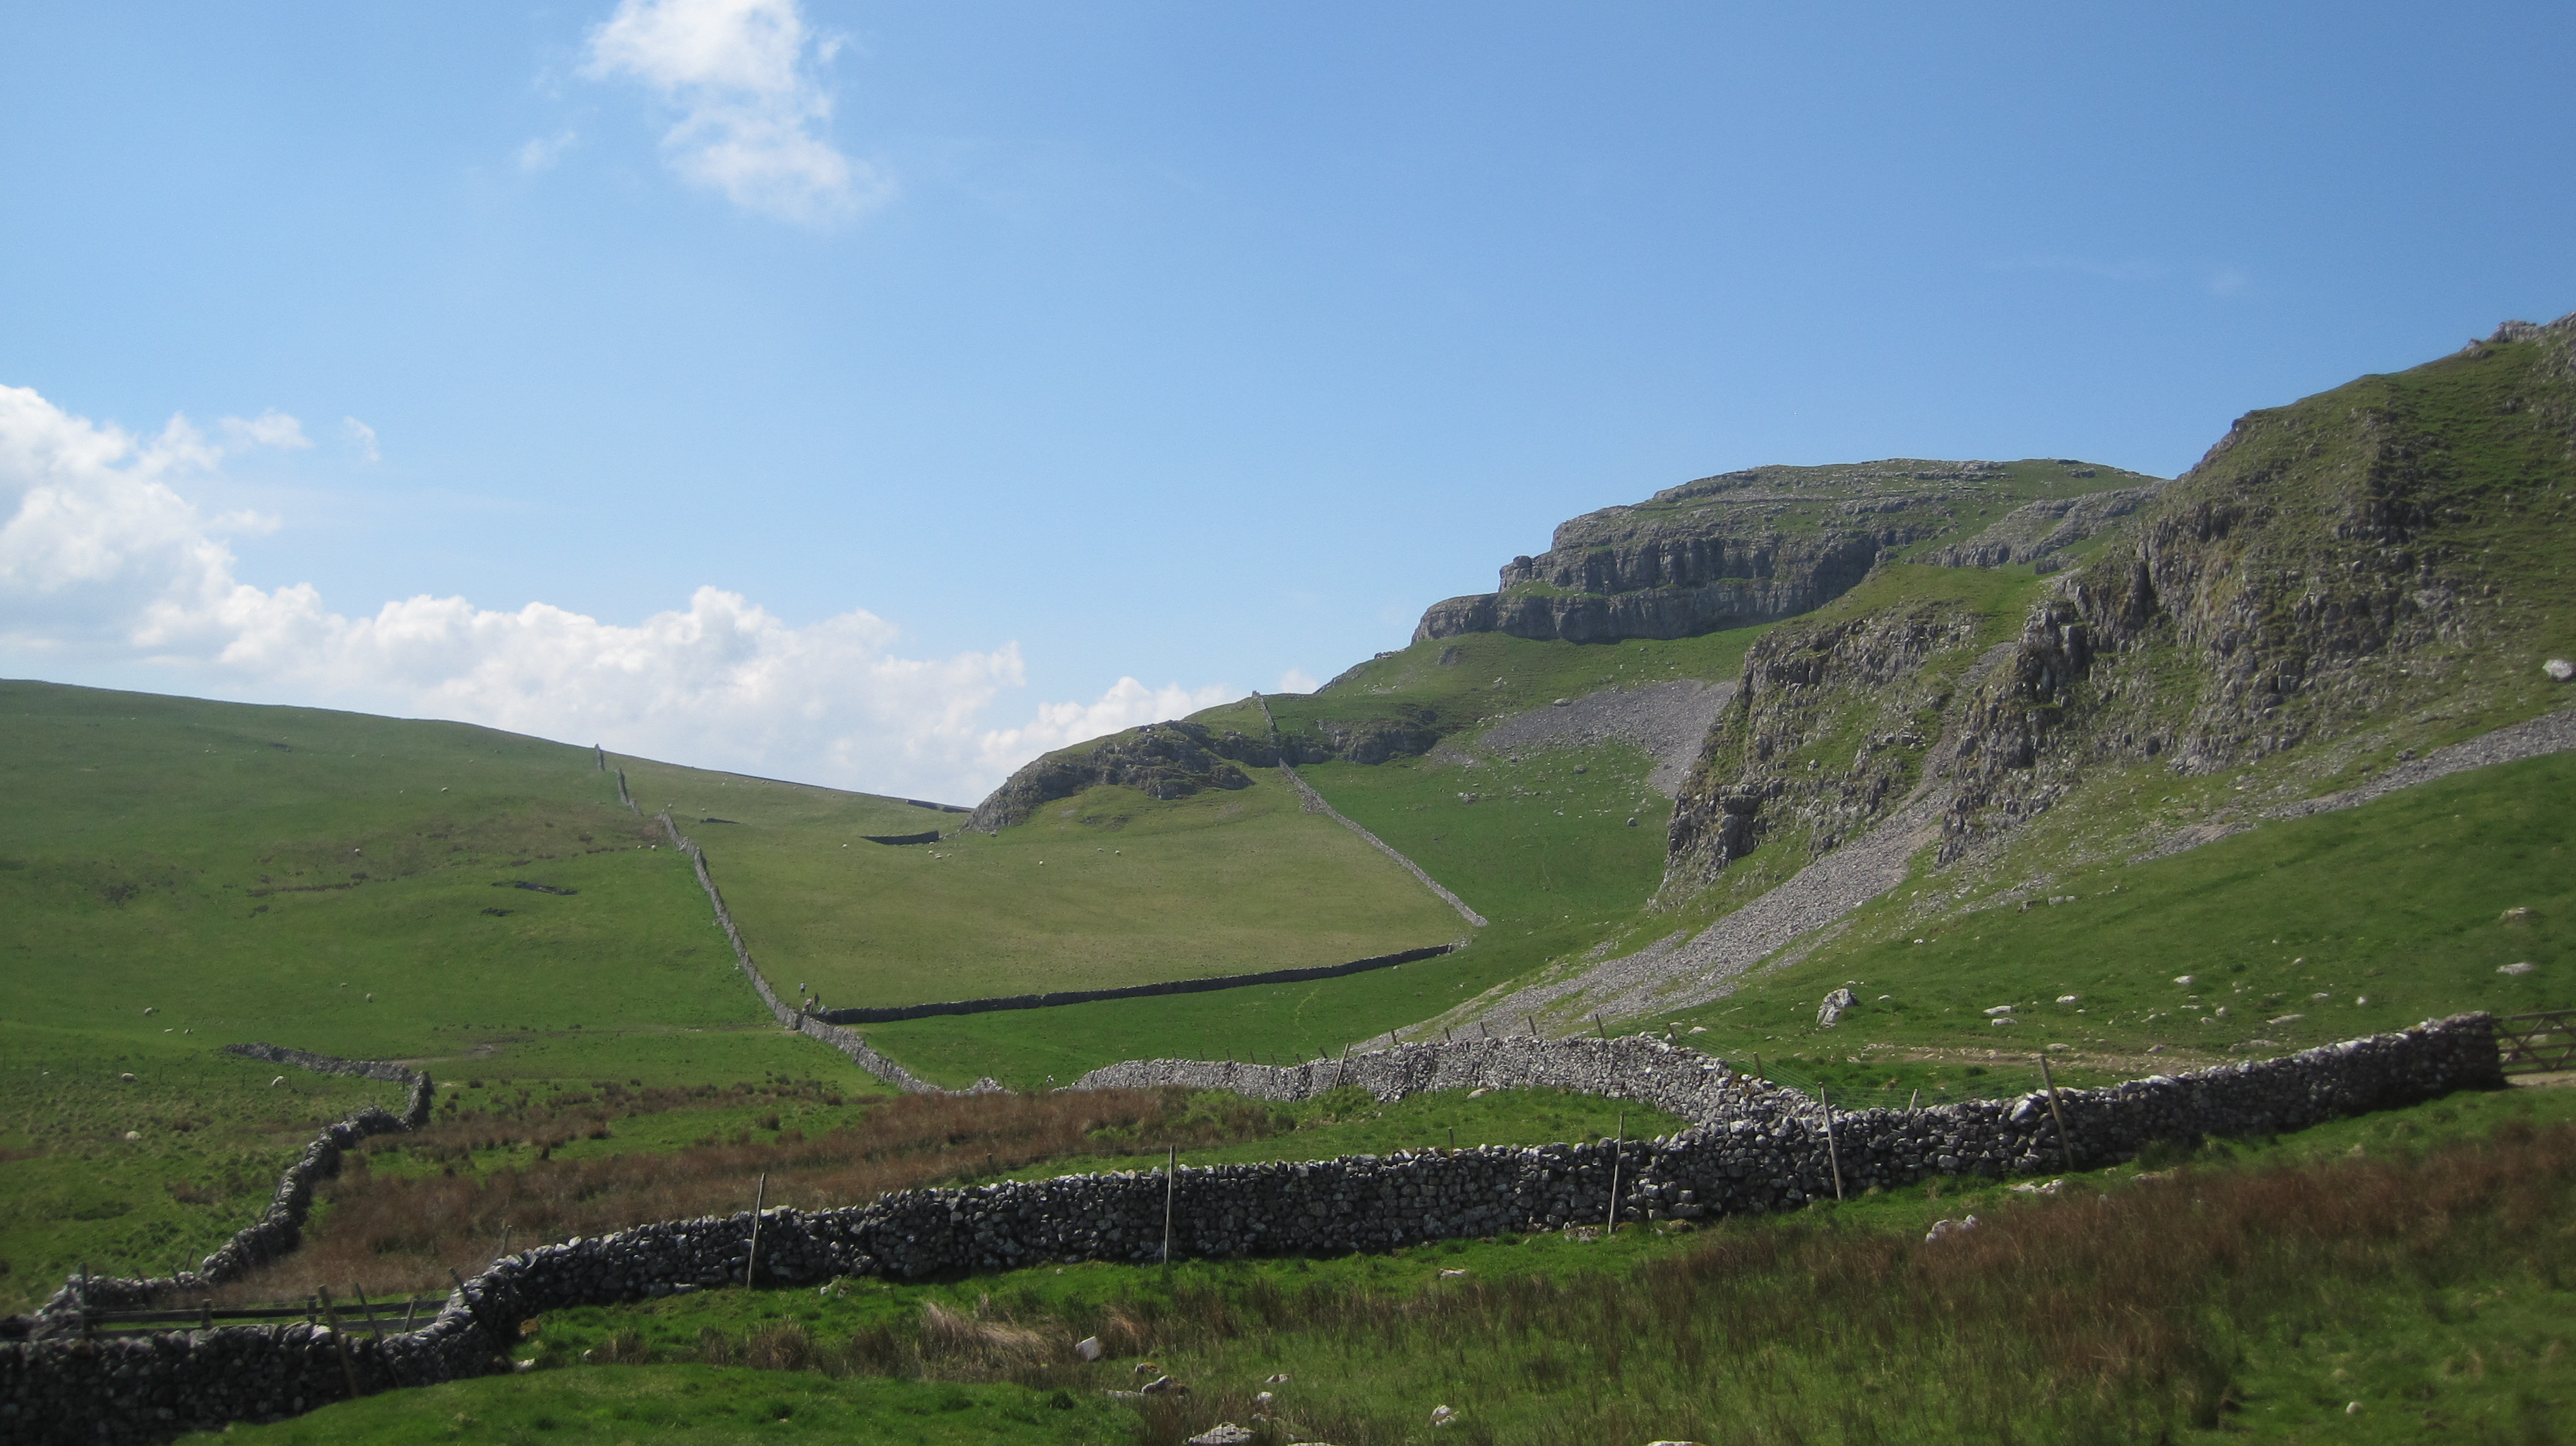 The British countryside with a steep grassy slope and a drystone wall against a hazy blue sky.